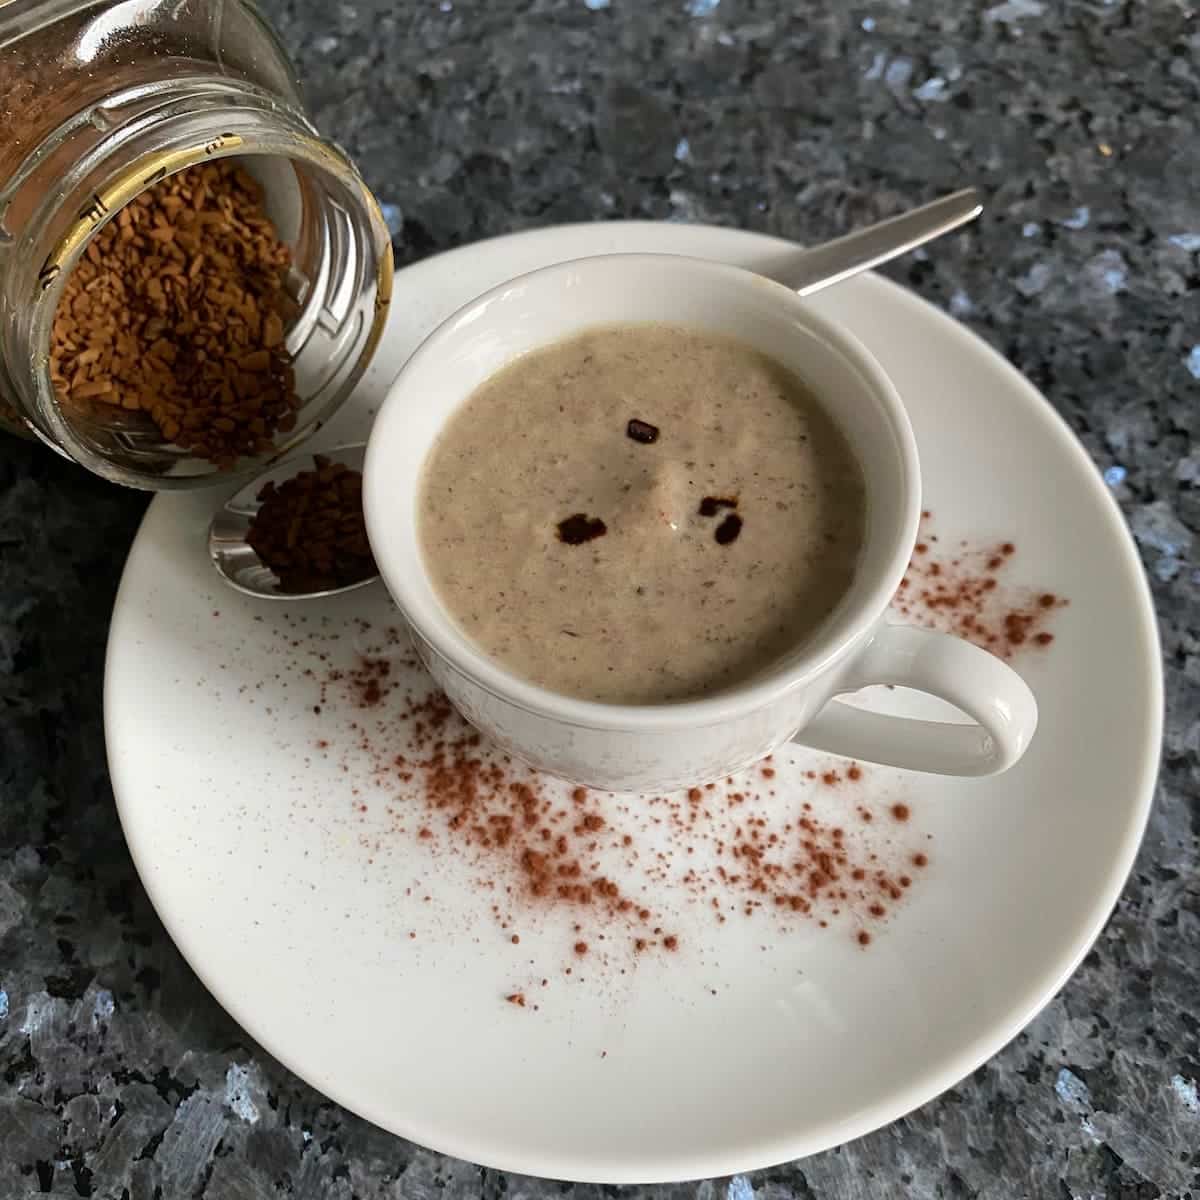 Creamy mushroom soup served in a cappuccino cup dusted with cocoa powder.